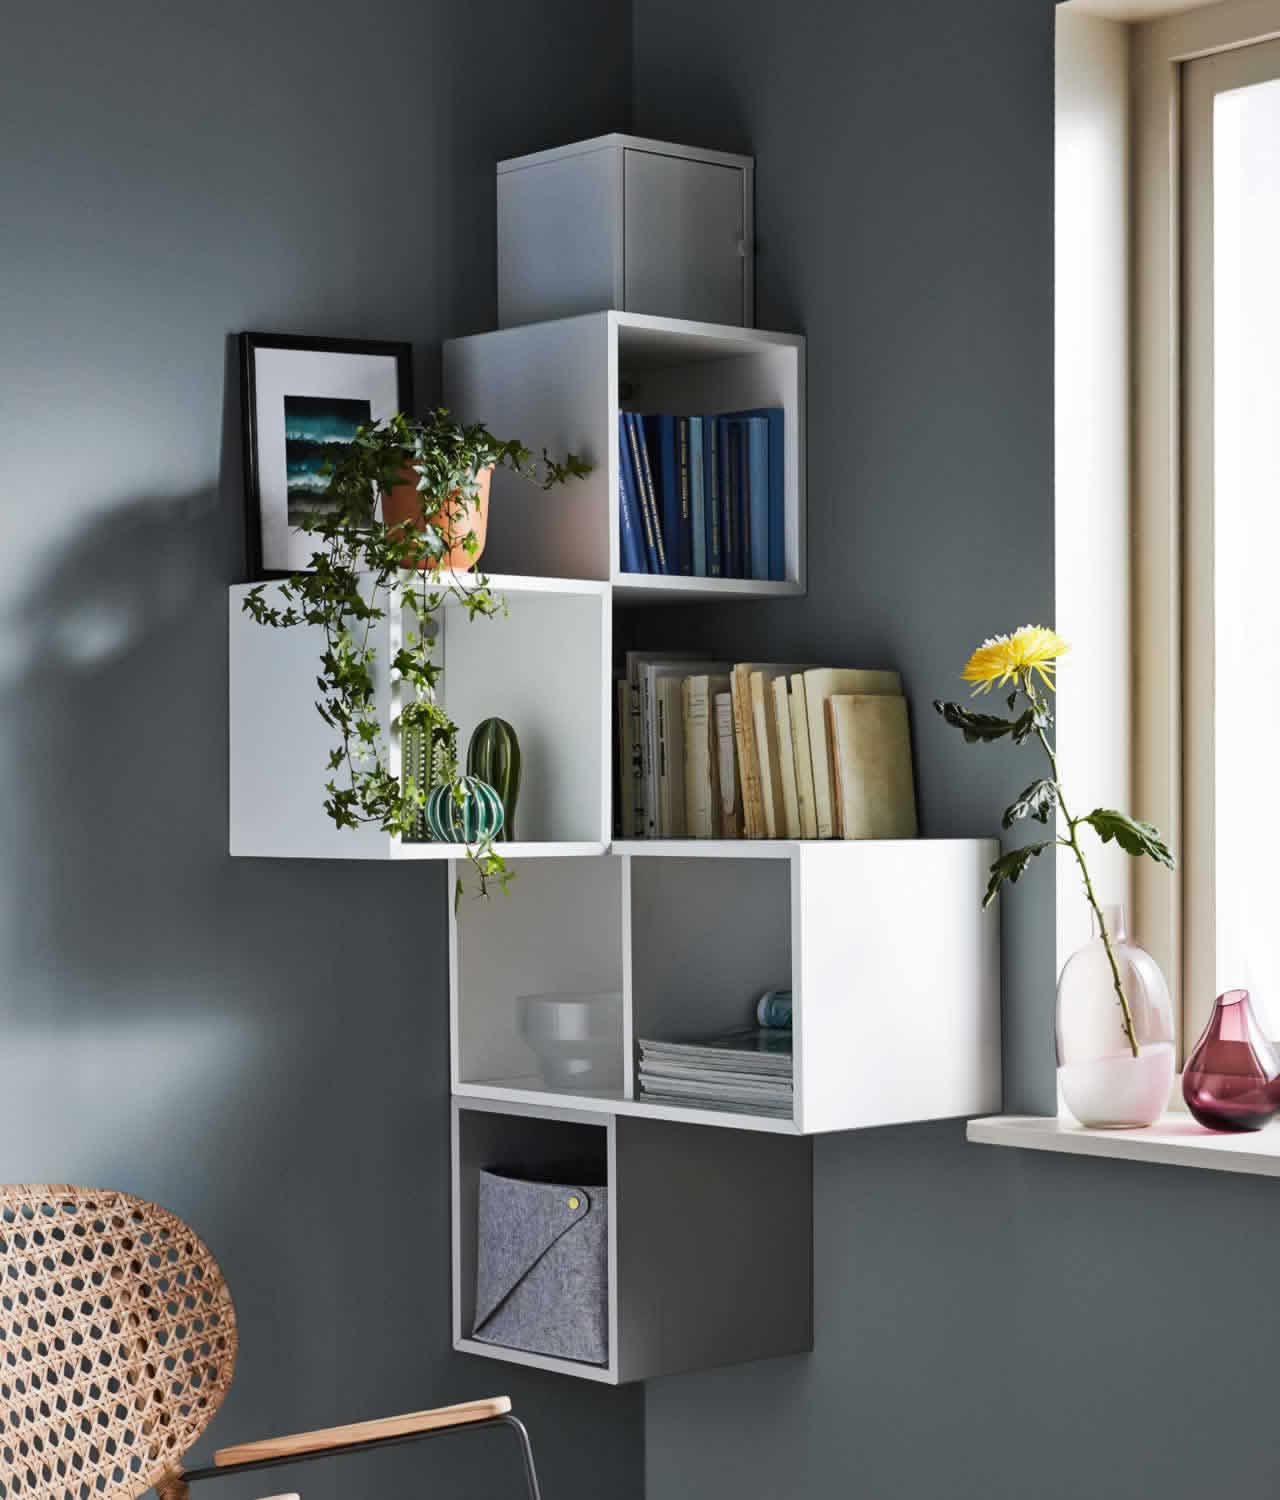 IKEA Ideas - Bring your corners out of the corner.